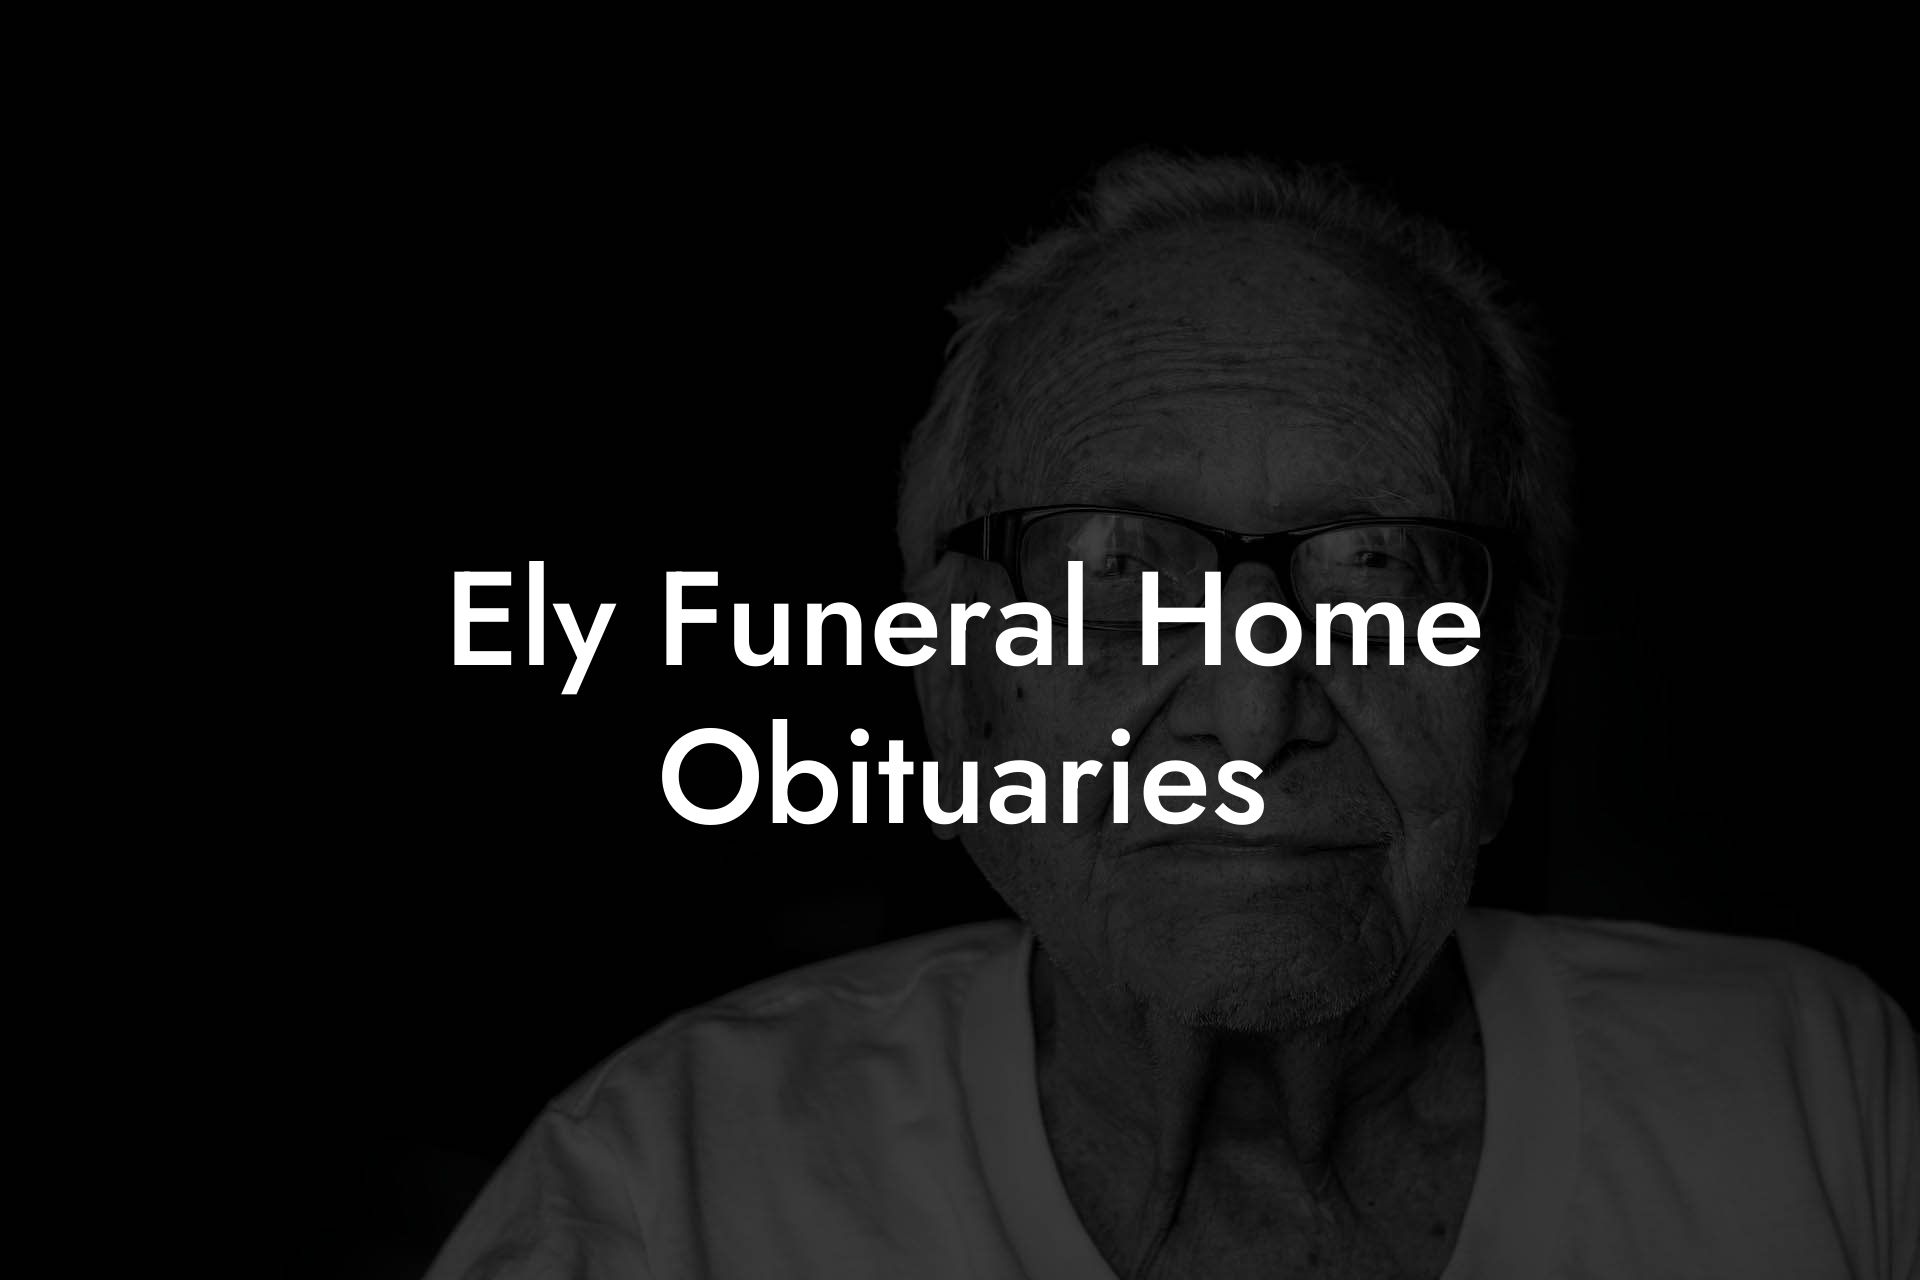 Ely Funeral Home Obituaries